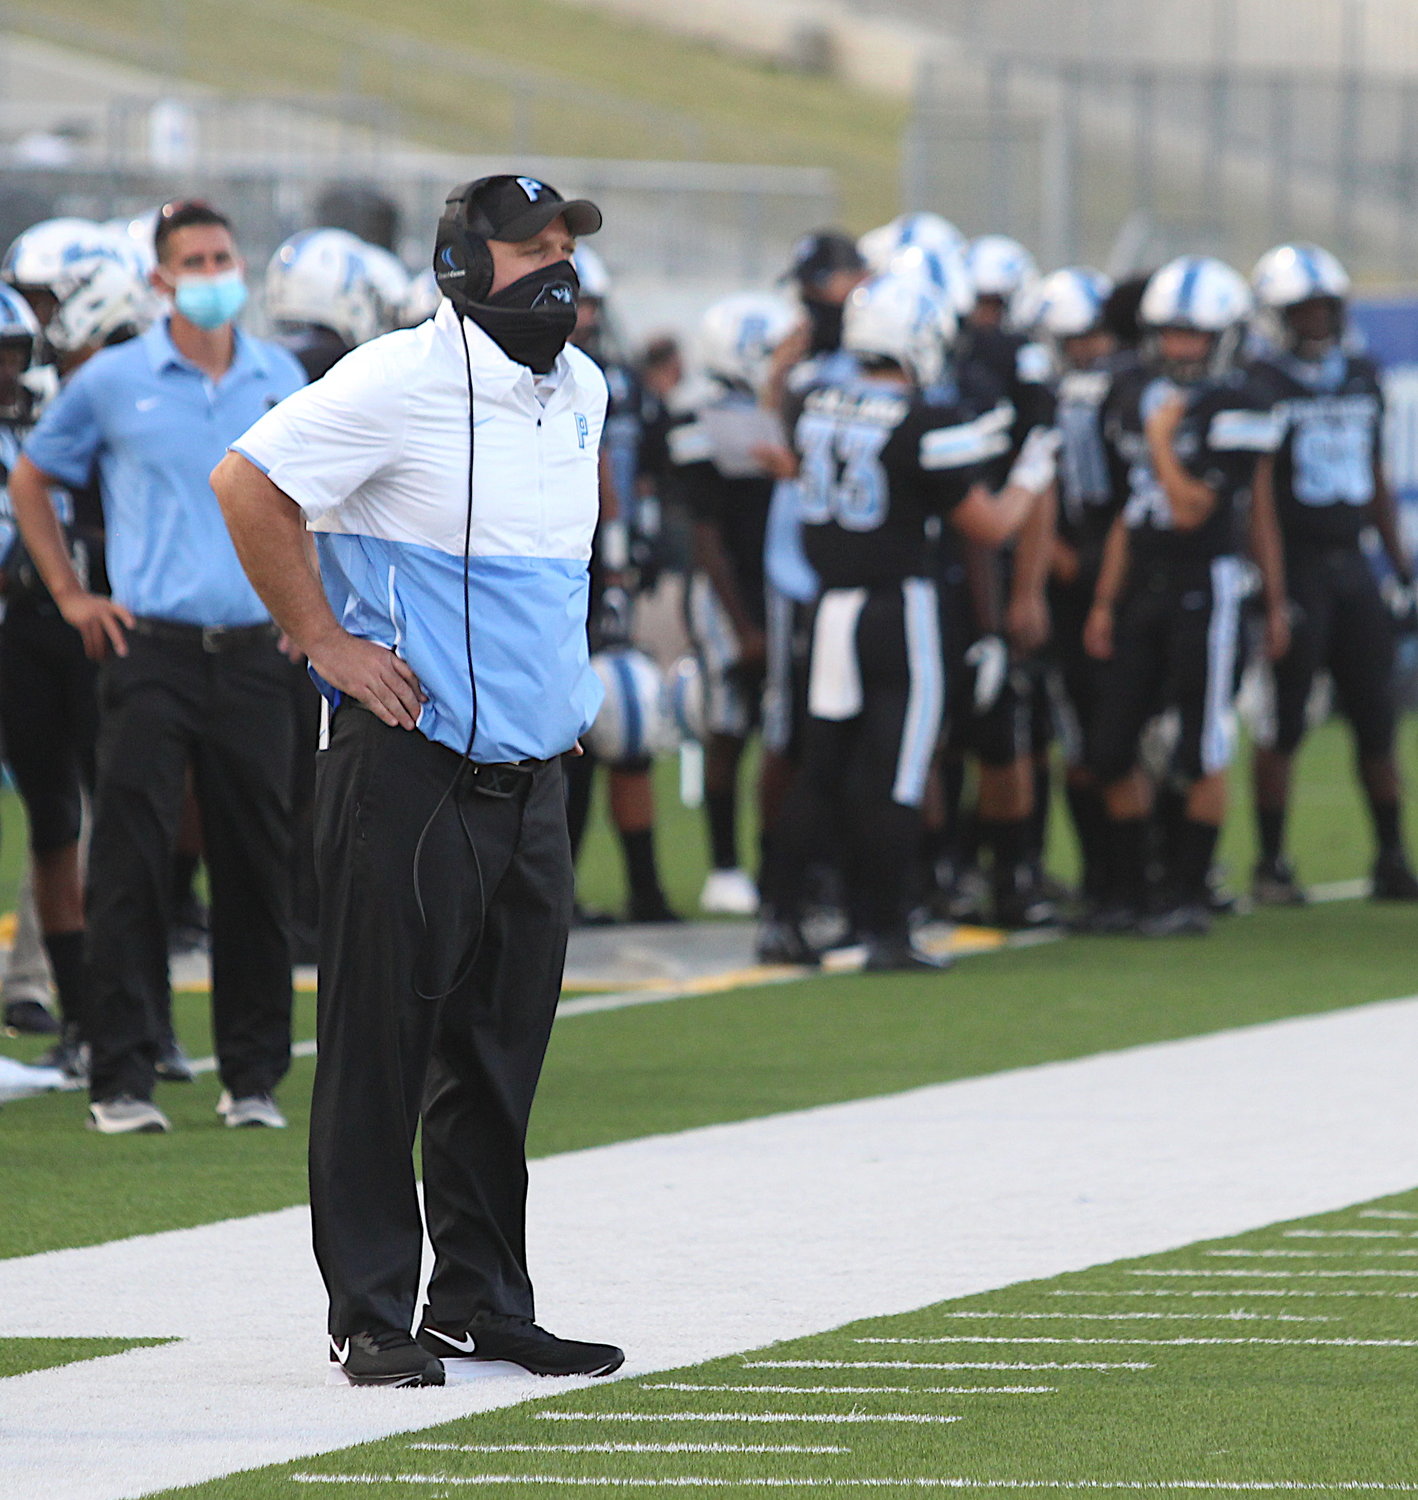 Paetow coach B.J. Gotte and the Panthers suffered just their first loss of the season with a 28-10 setback to No. 5 state-ranked Richmond Foster on Saturday at Legacy Stadium and now stands 5-1. However, because of the loss to Foster, the Panthers will play Angleton next Saturday at 1 p.m. at Angleton in a playoff play-in game.